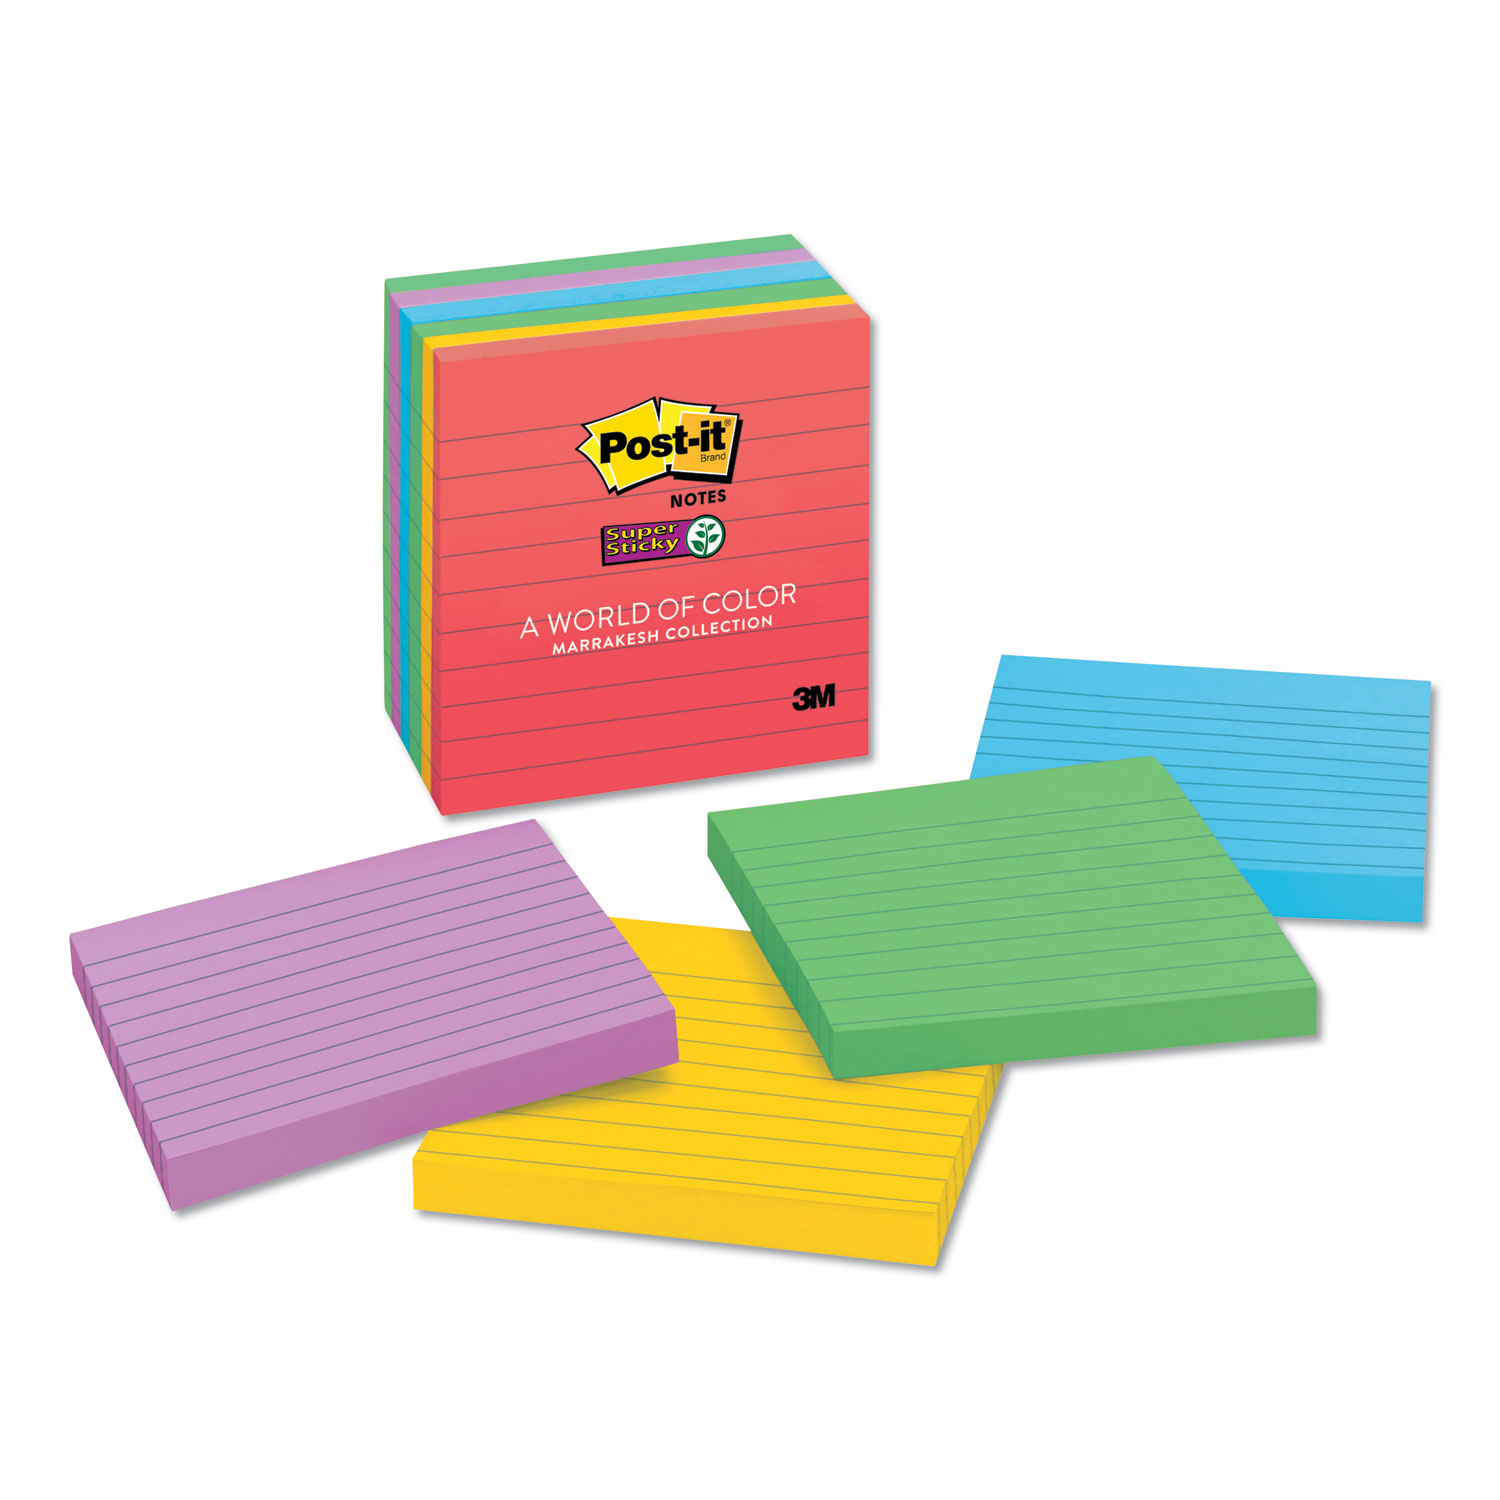  Post-it Notes Super Sticky 675-6SSAN Pads in Marrakesh Colors, Lined, 4 x 4, 90-Sheet, 6/Pack (MMM6756SSAN) 